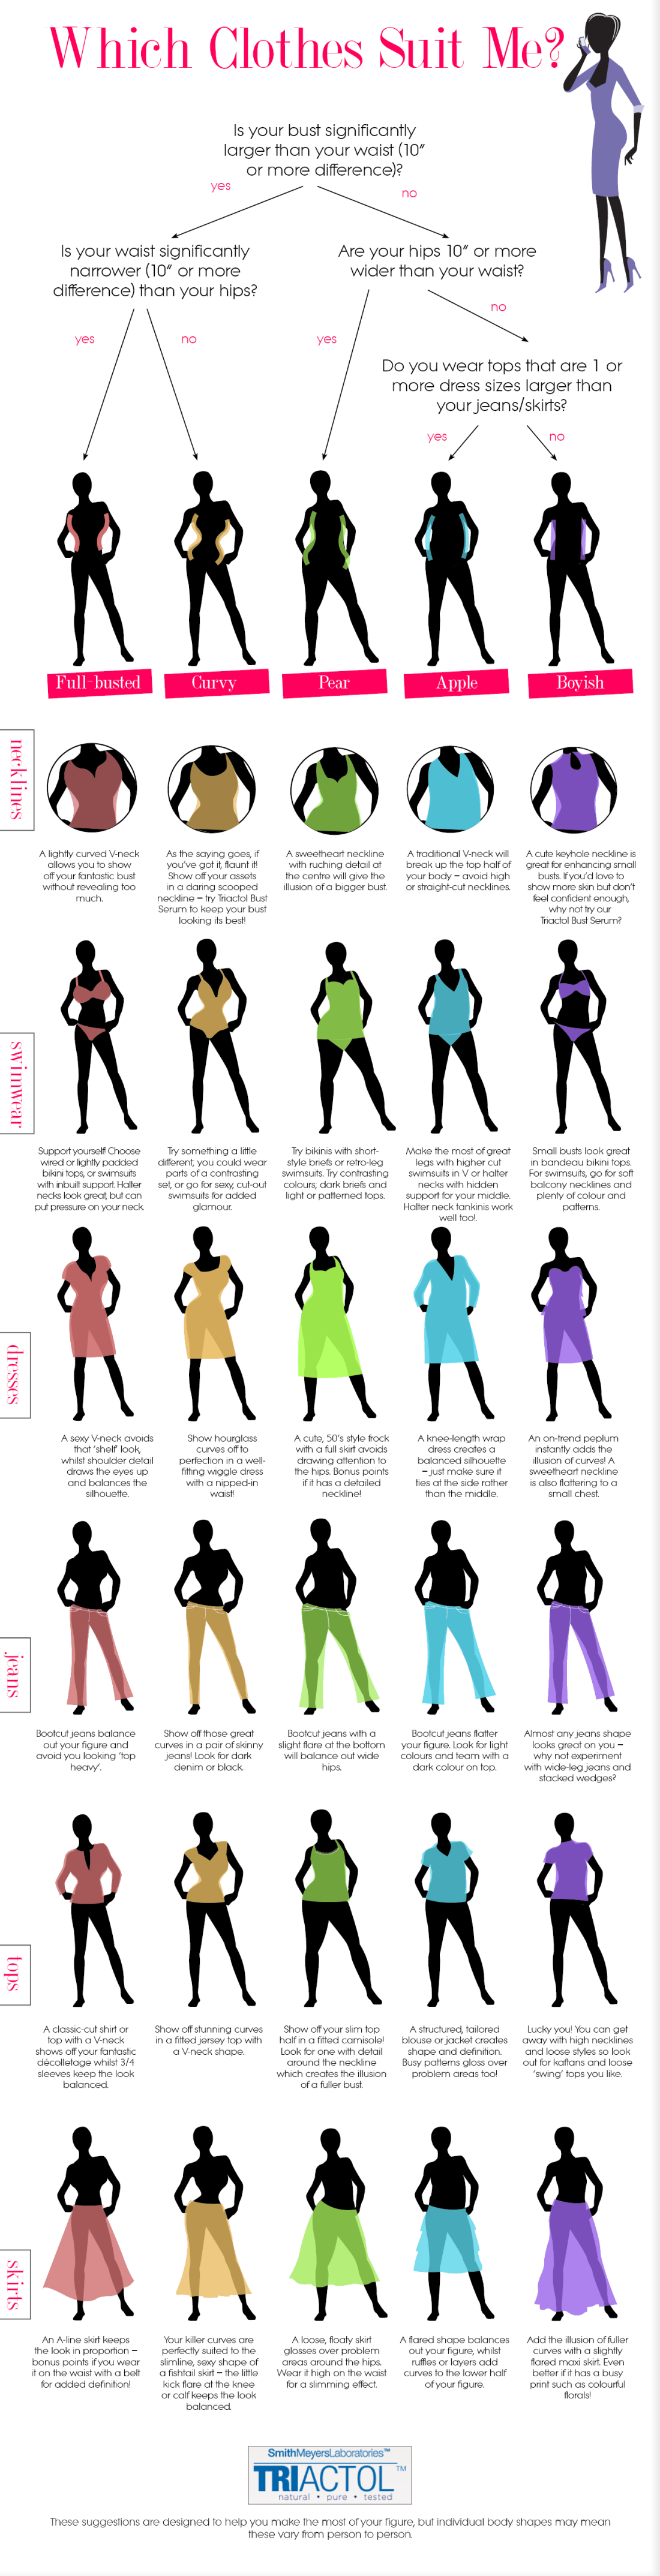 which-clothes-suit-me-infographic-infographicsmania